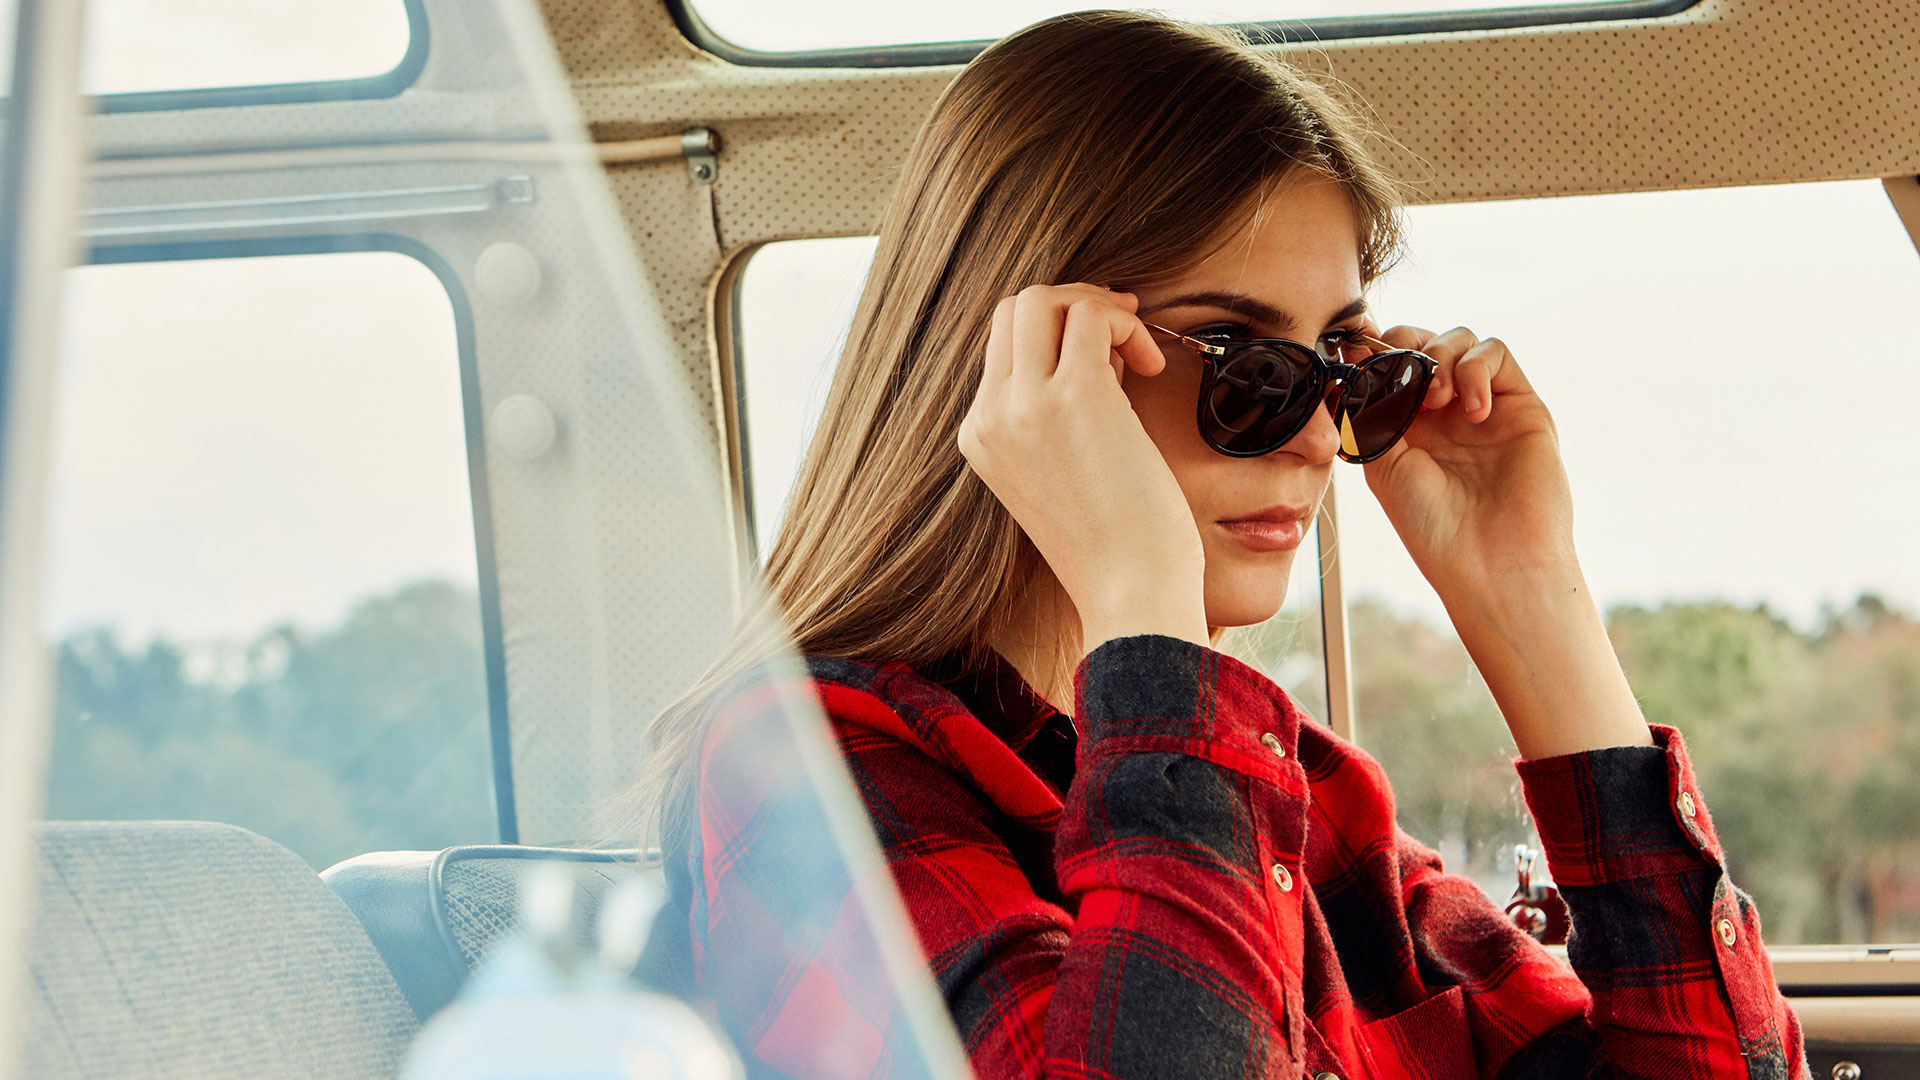 Model in car with sunglasses and plaid shirt photographed by advertising photographer Kate Benson.